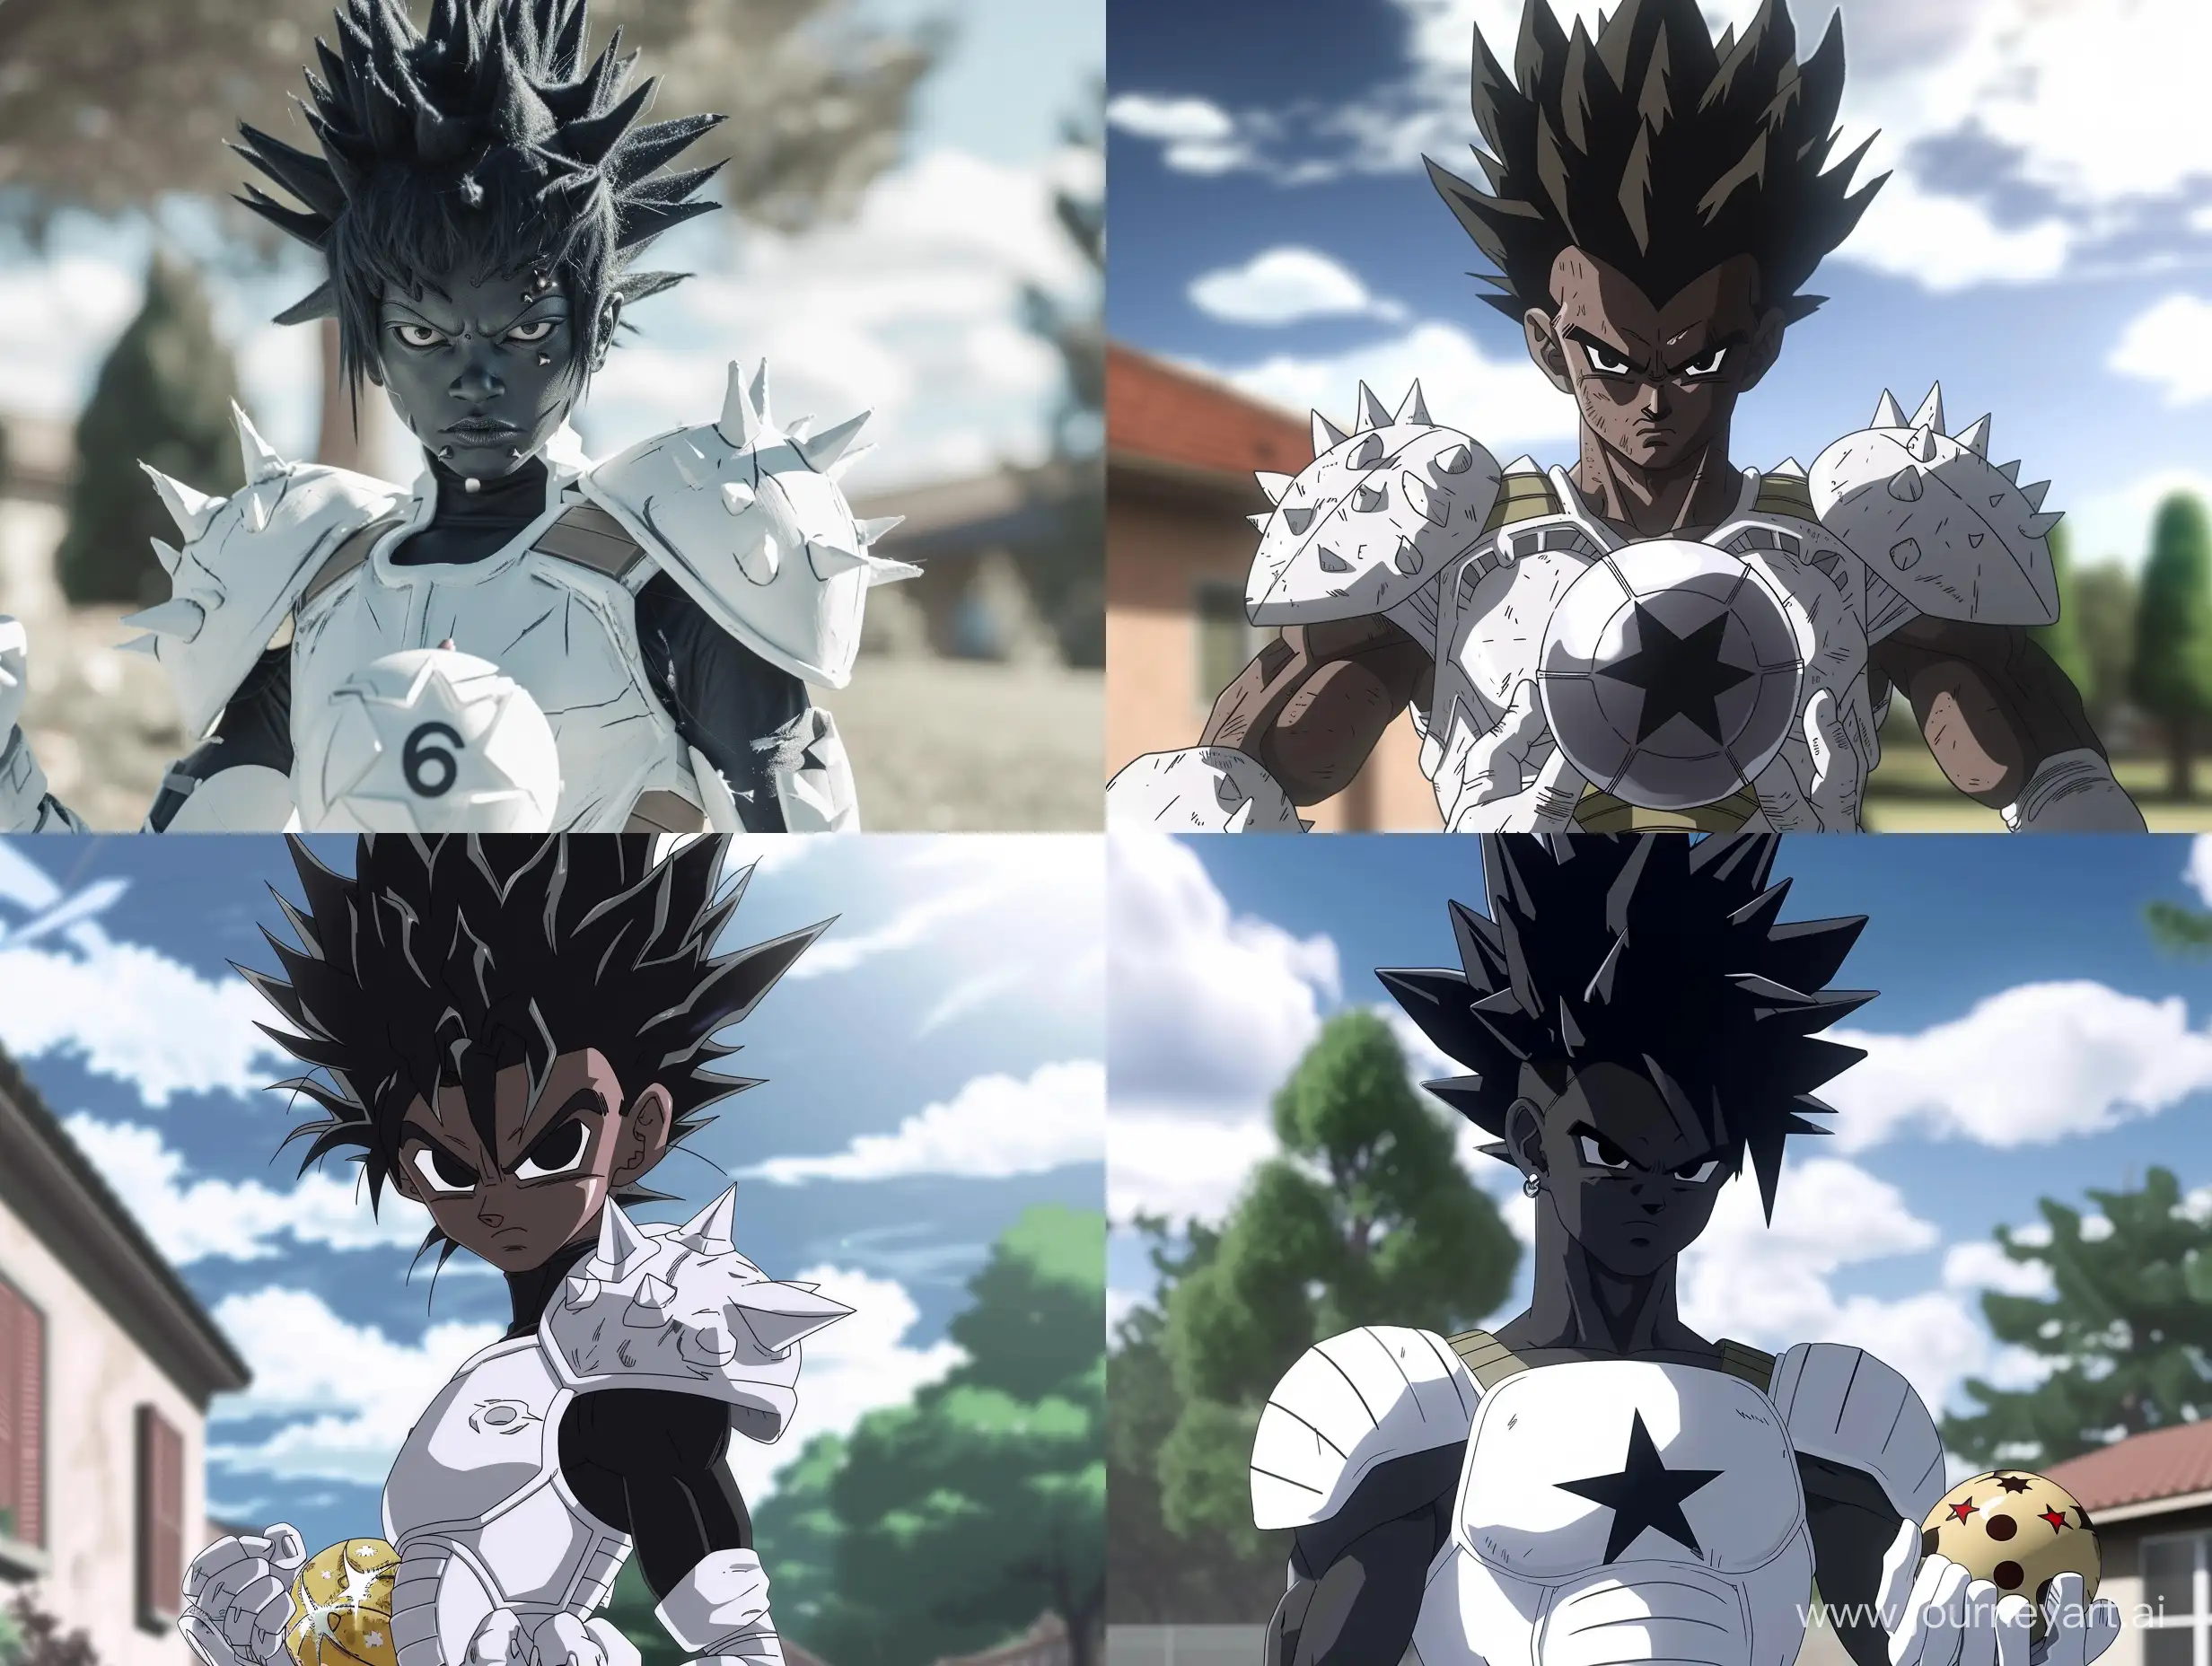 Epic-Black-Anime-Character-with-6Star-Dragonball-in-White-Armor